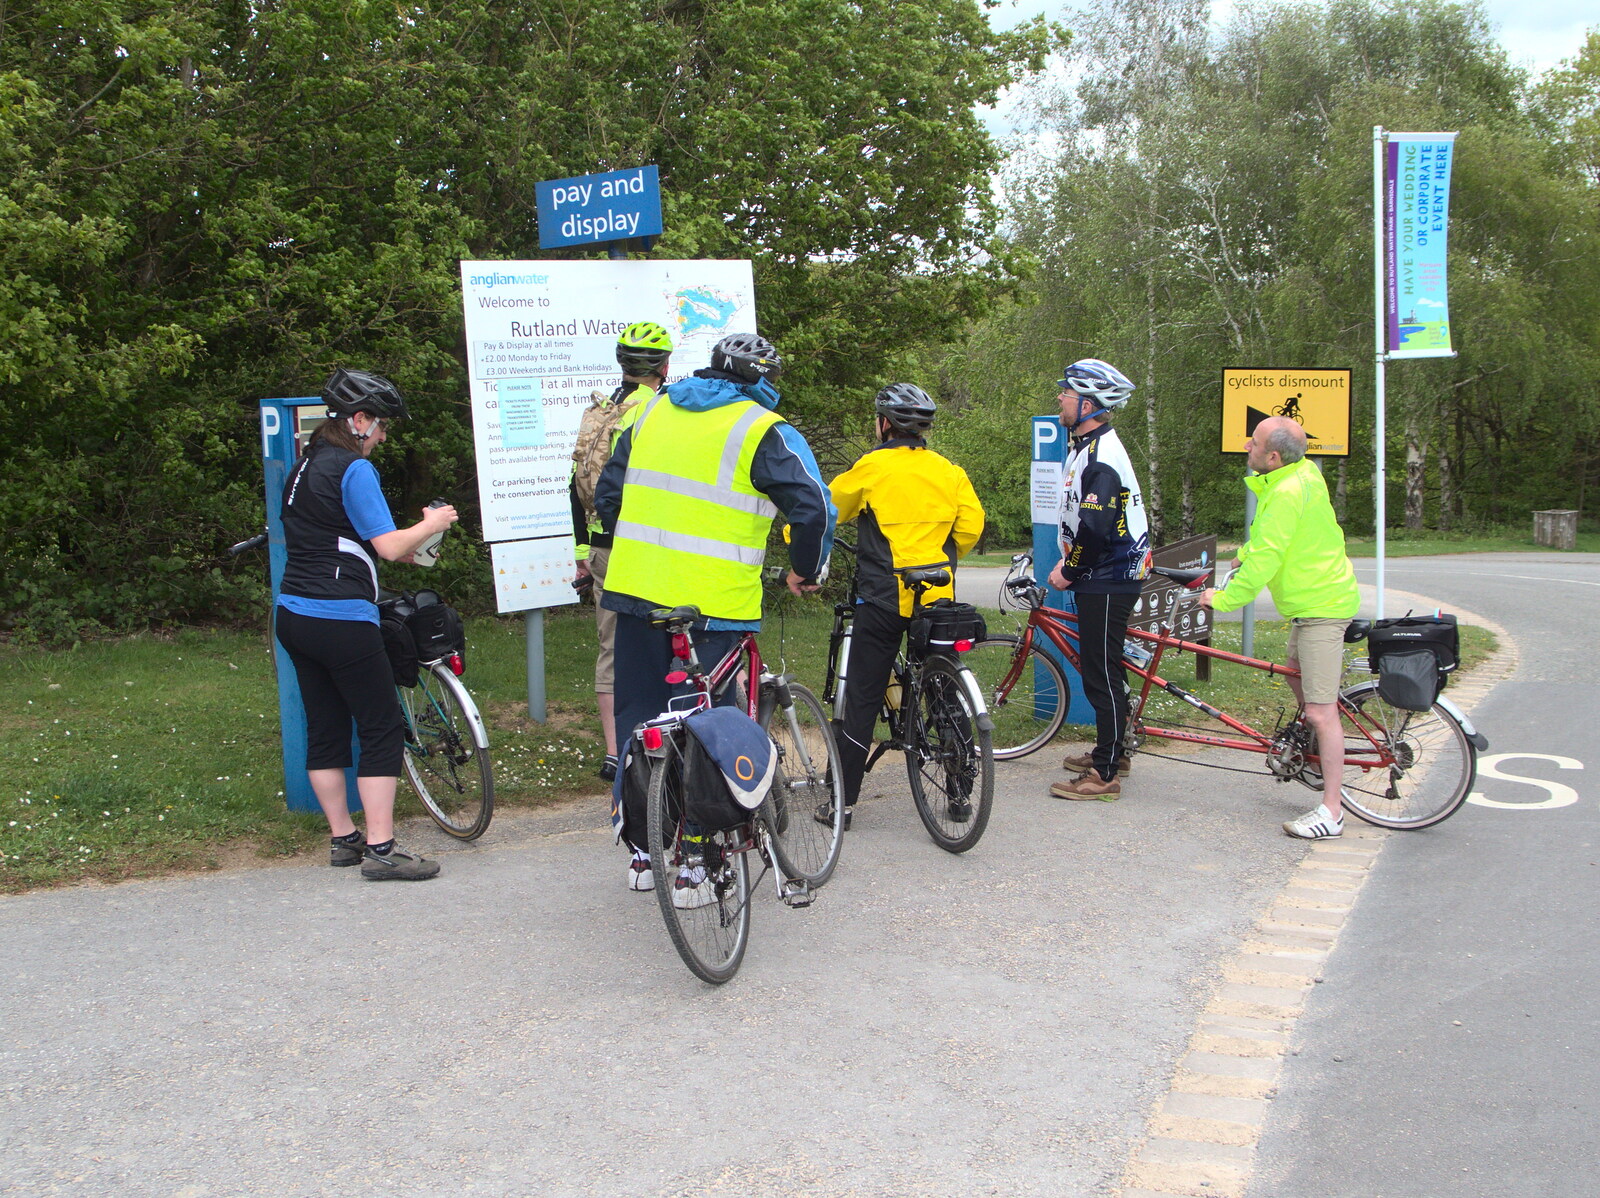 An information sign is consulted from The BSCC Weekend Away, Lyddington, Rutland - 9th May 2015